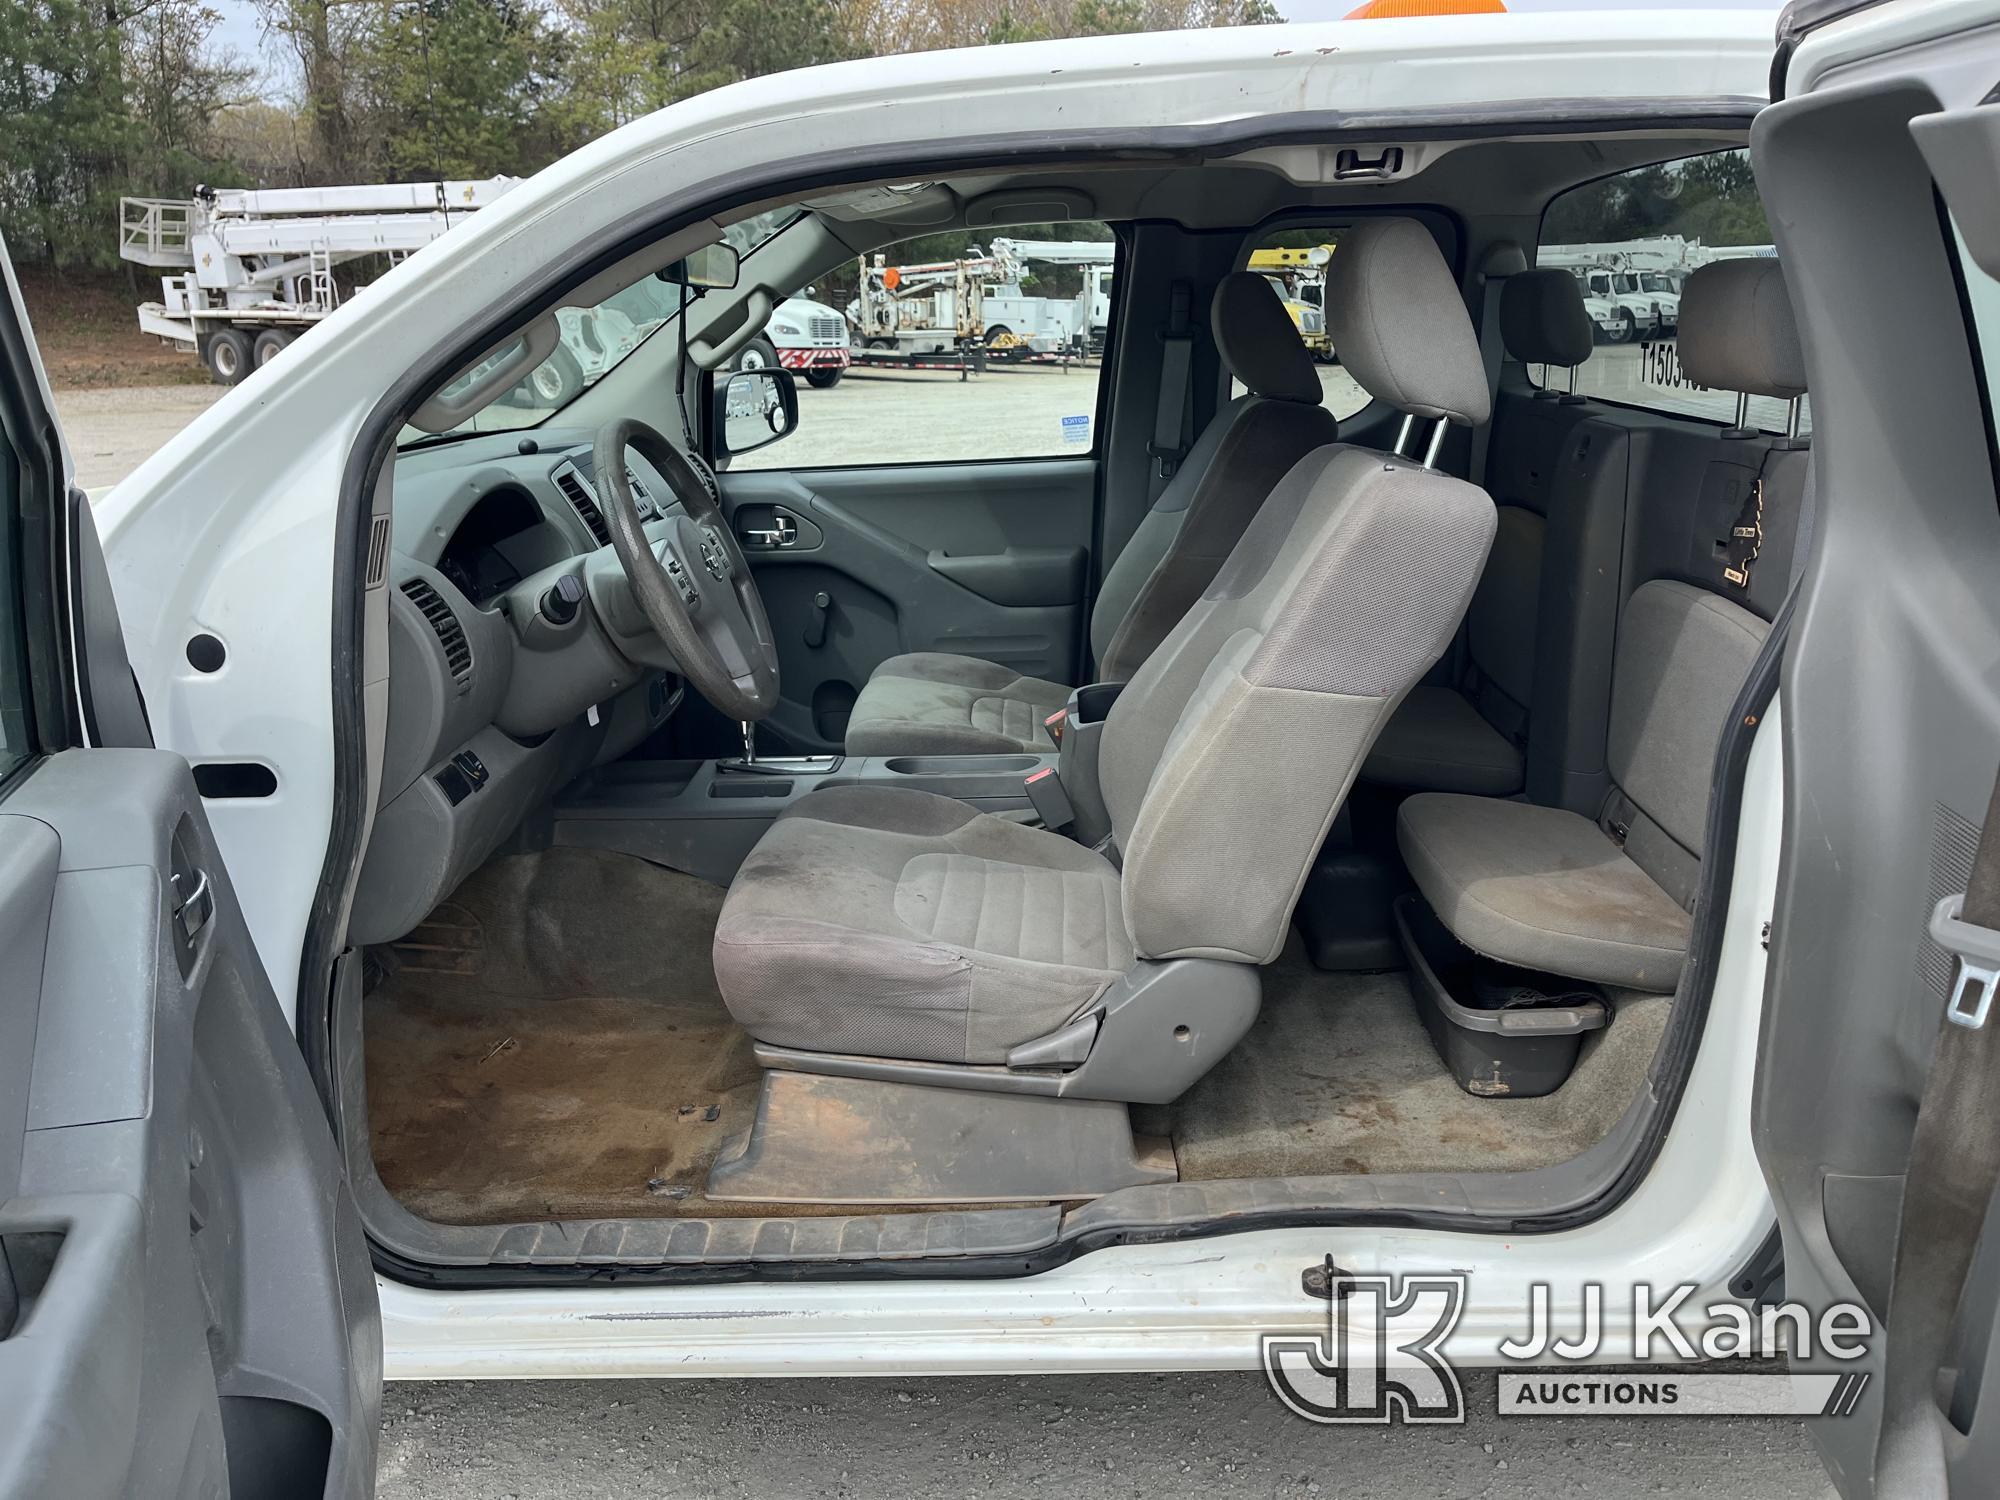 (Chester, VA) 2015 Nissan Frontier Extended-Cab Pickup Truck Runs & Moves) (Check Engine Light On, R